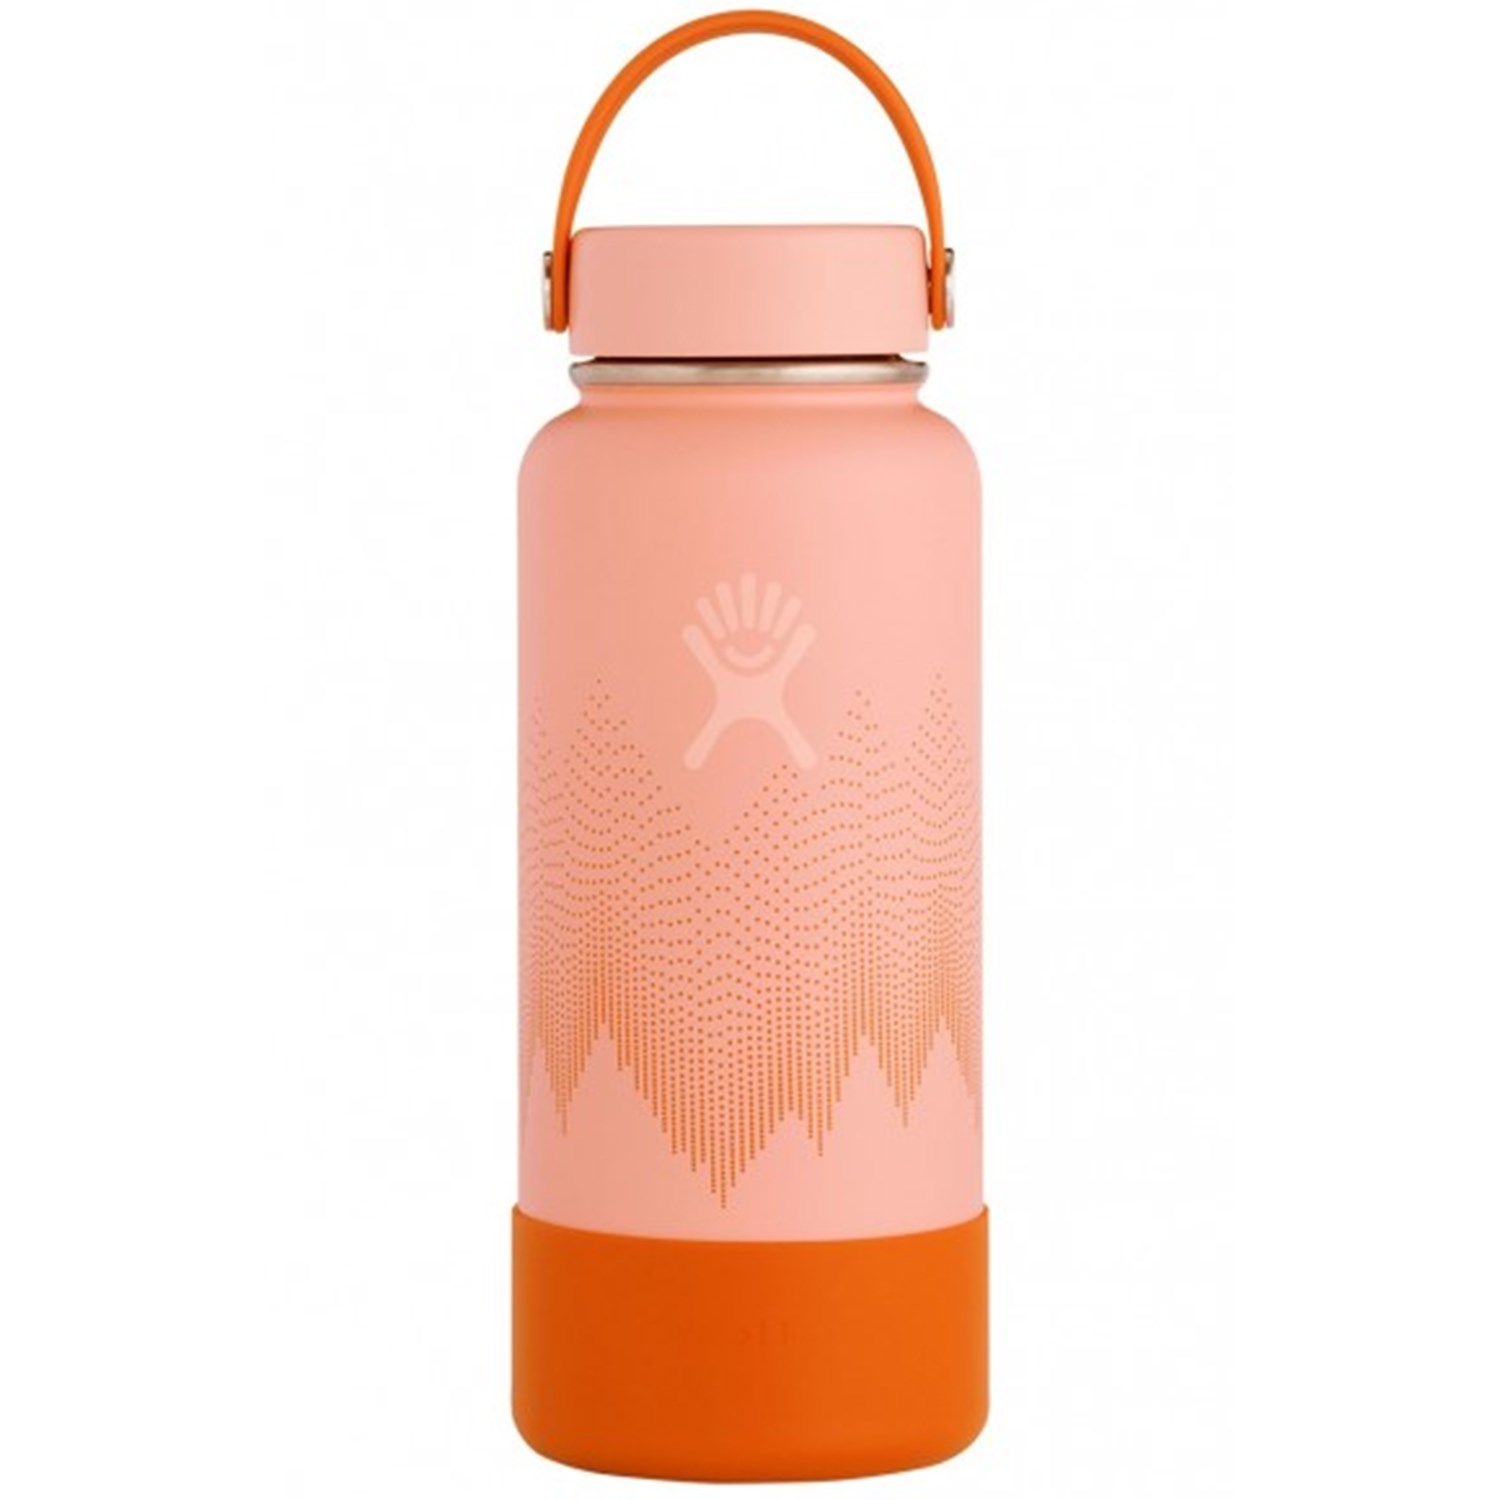 https://images.evo.com/imgp/zoom/166416/682108/hydro-flask-wonder-limited-edition-32oz-wide-mouth-water-bottle-.jpg